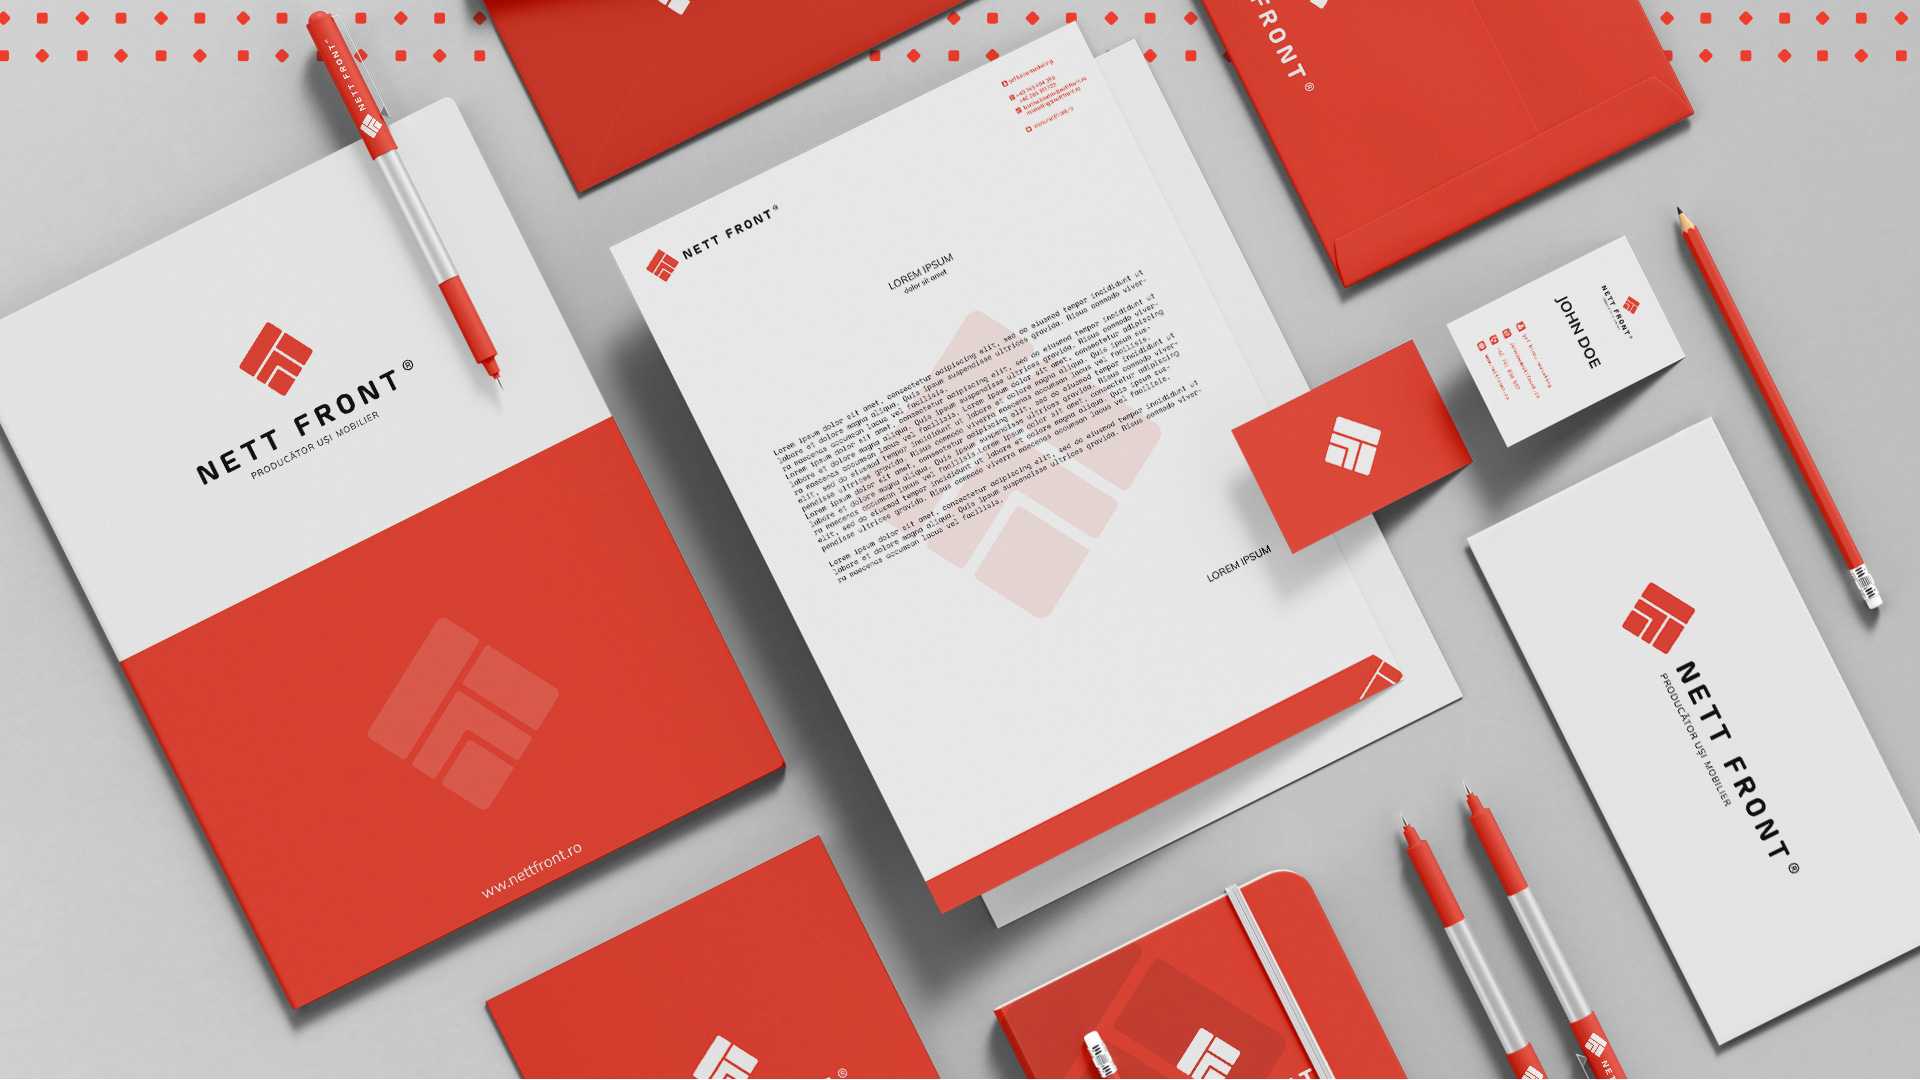 Nettfront products branding